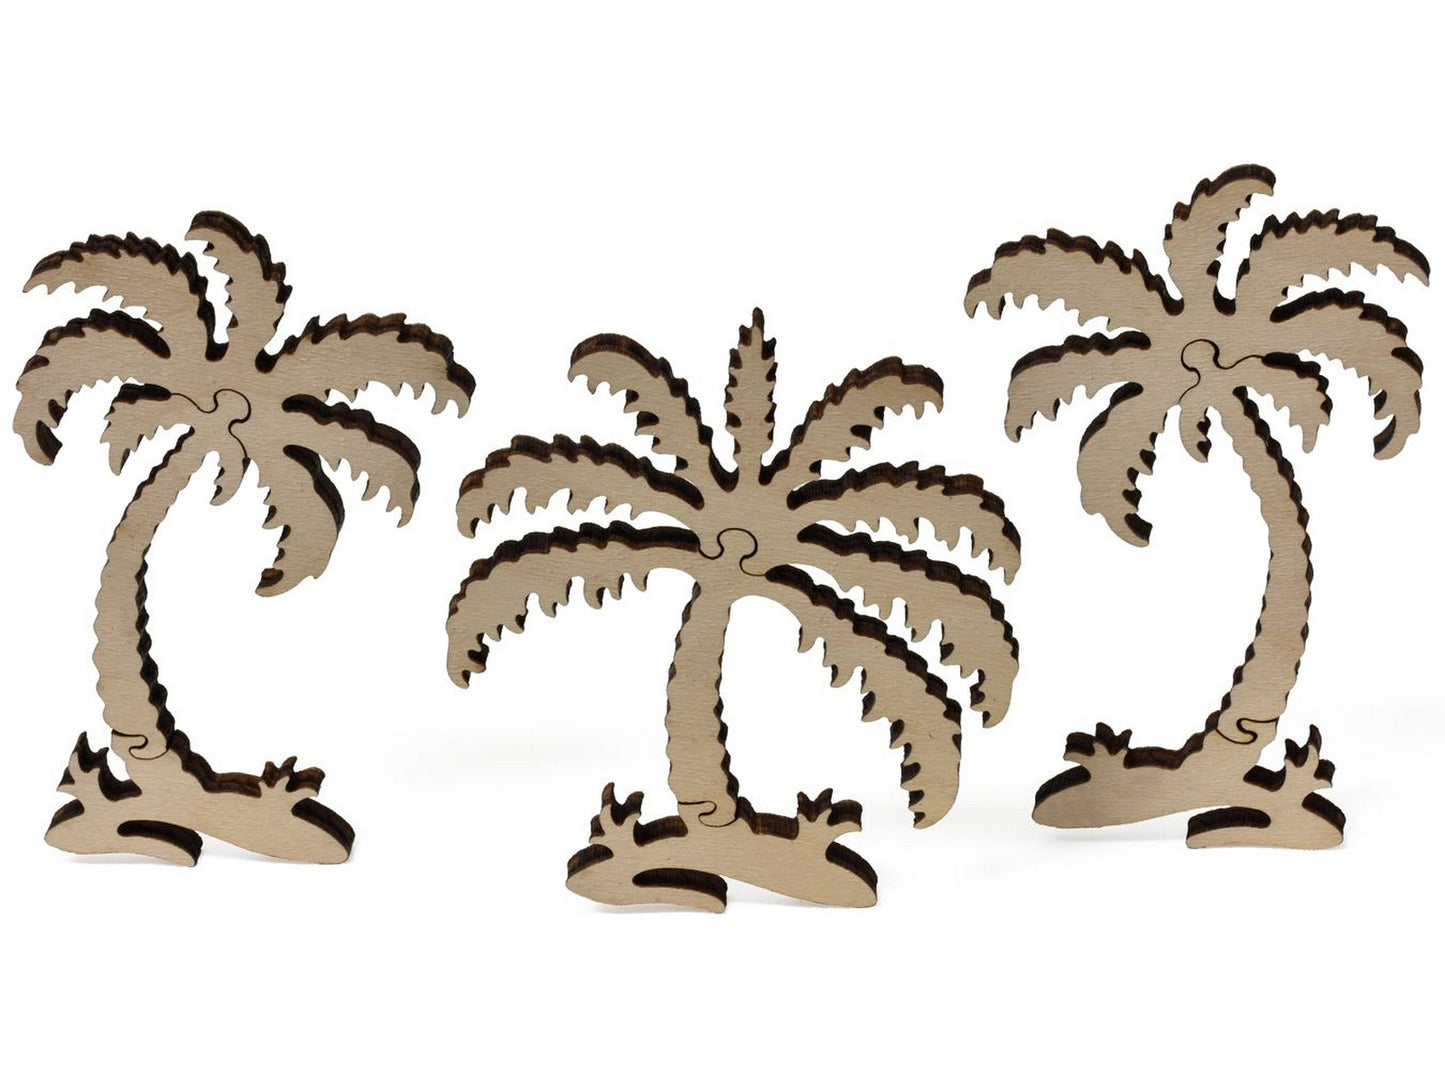 A closeup of pieces showing palm trees.